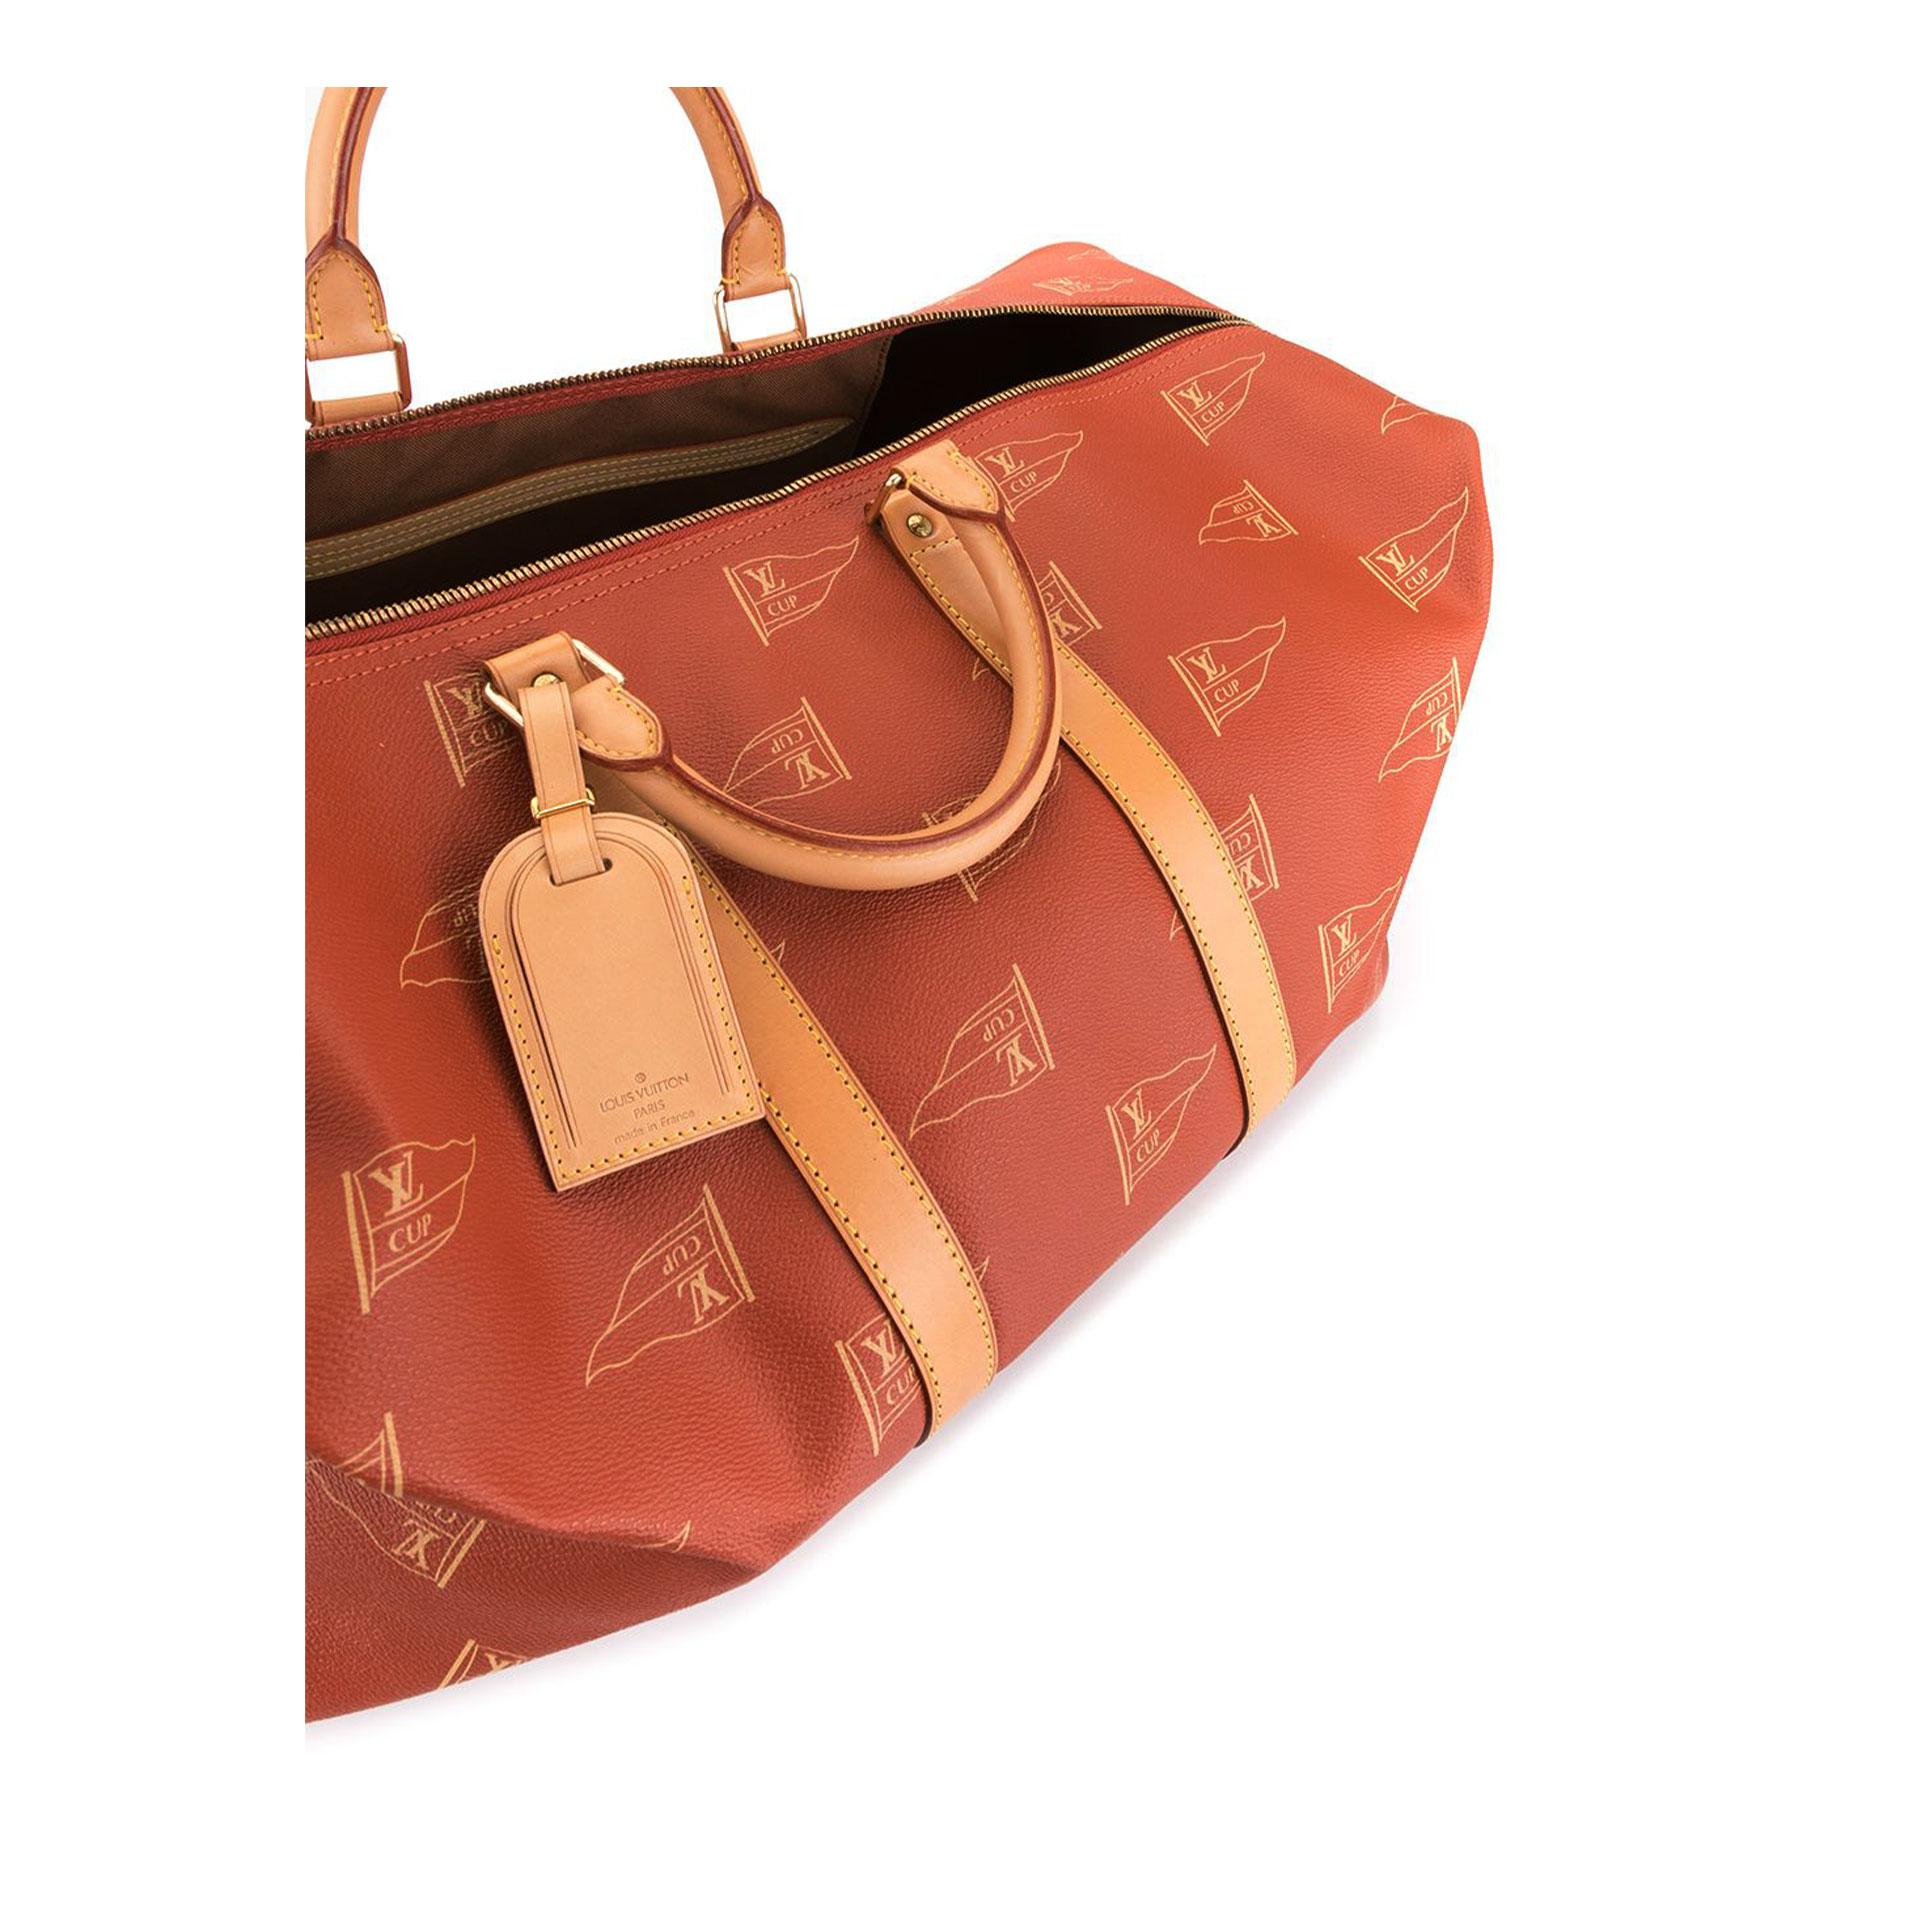 Women's or Men's Louis Vuitton Keepall Sailing Boating Duffel Rare Limited Edition Travel Bag For Sale